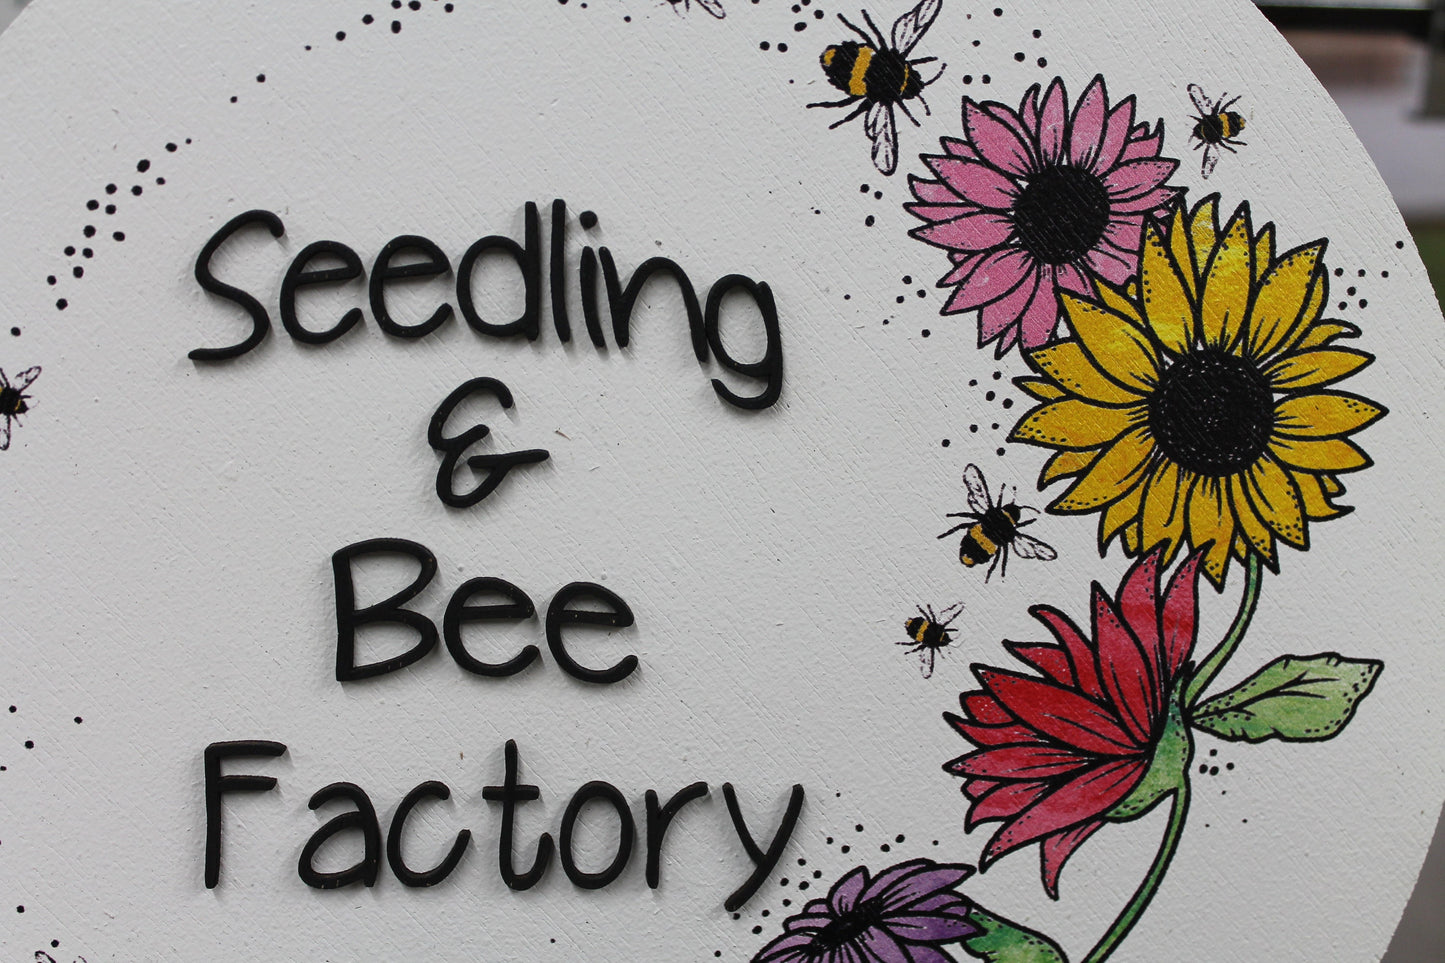 Floral Border Round Sign Seeds and Bees Small Business Uv printed and Raised Letters Handmade 3D Factory Greenhouse Grower Custom Made